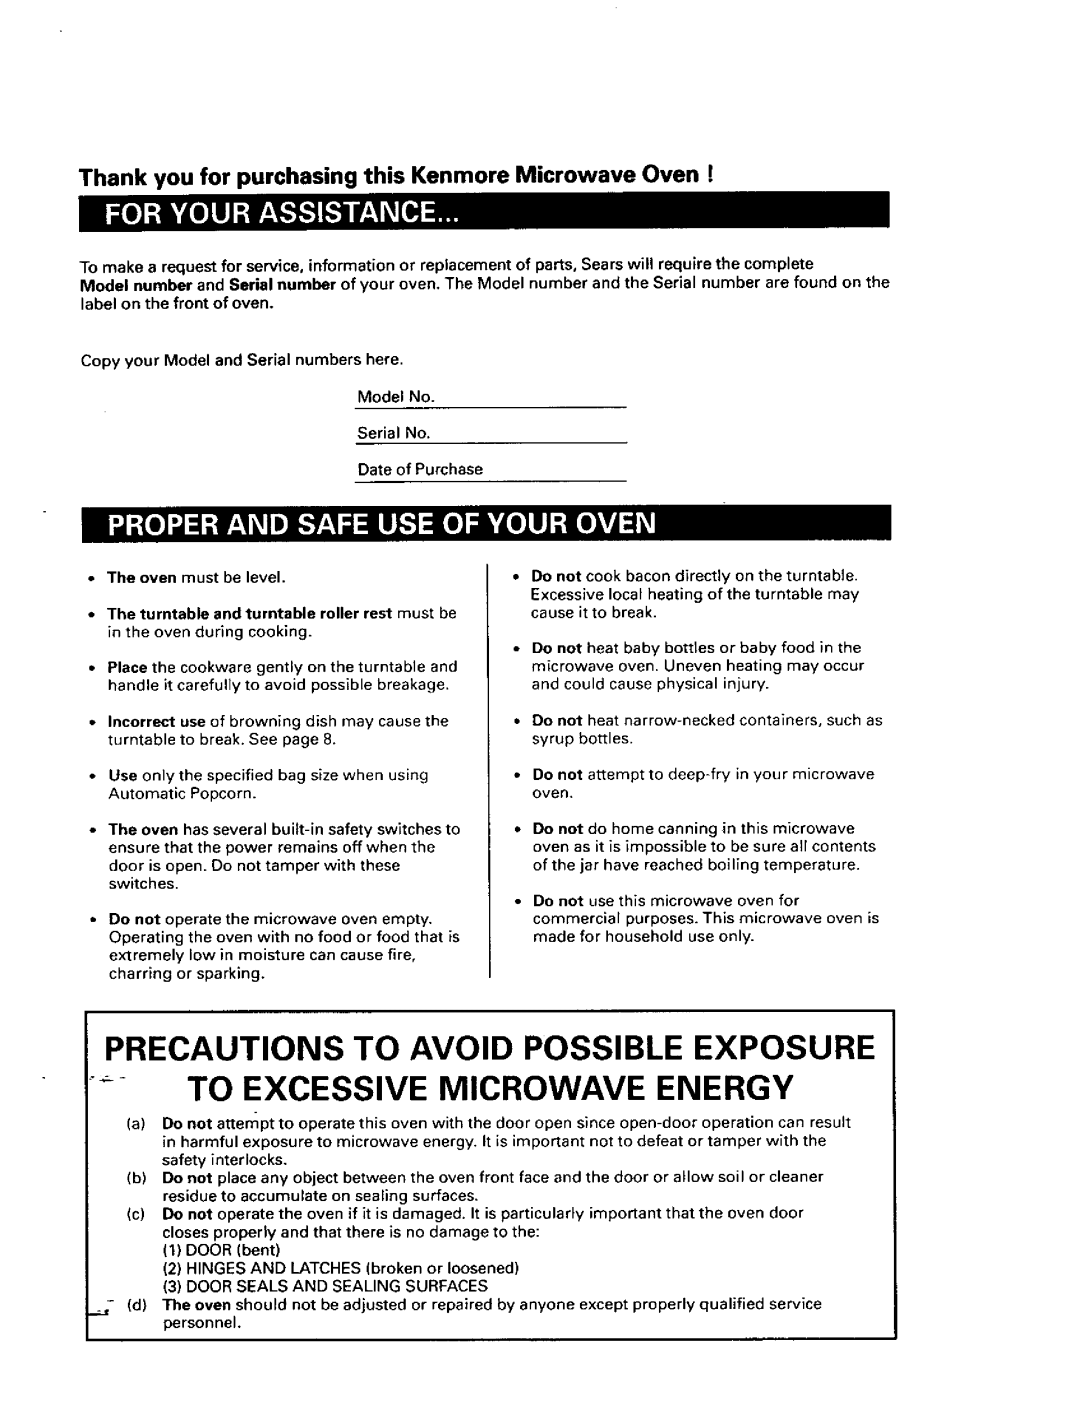 Sears 565.66101 owner manual Precautions To Avoid Possible Exposure, To Excessive Microwave Energy 